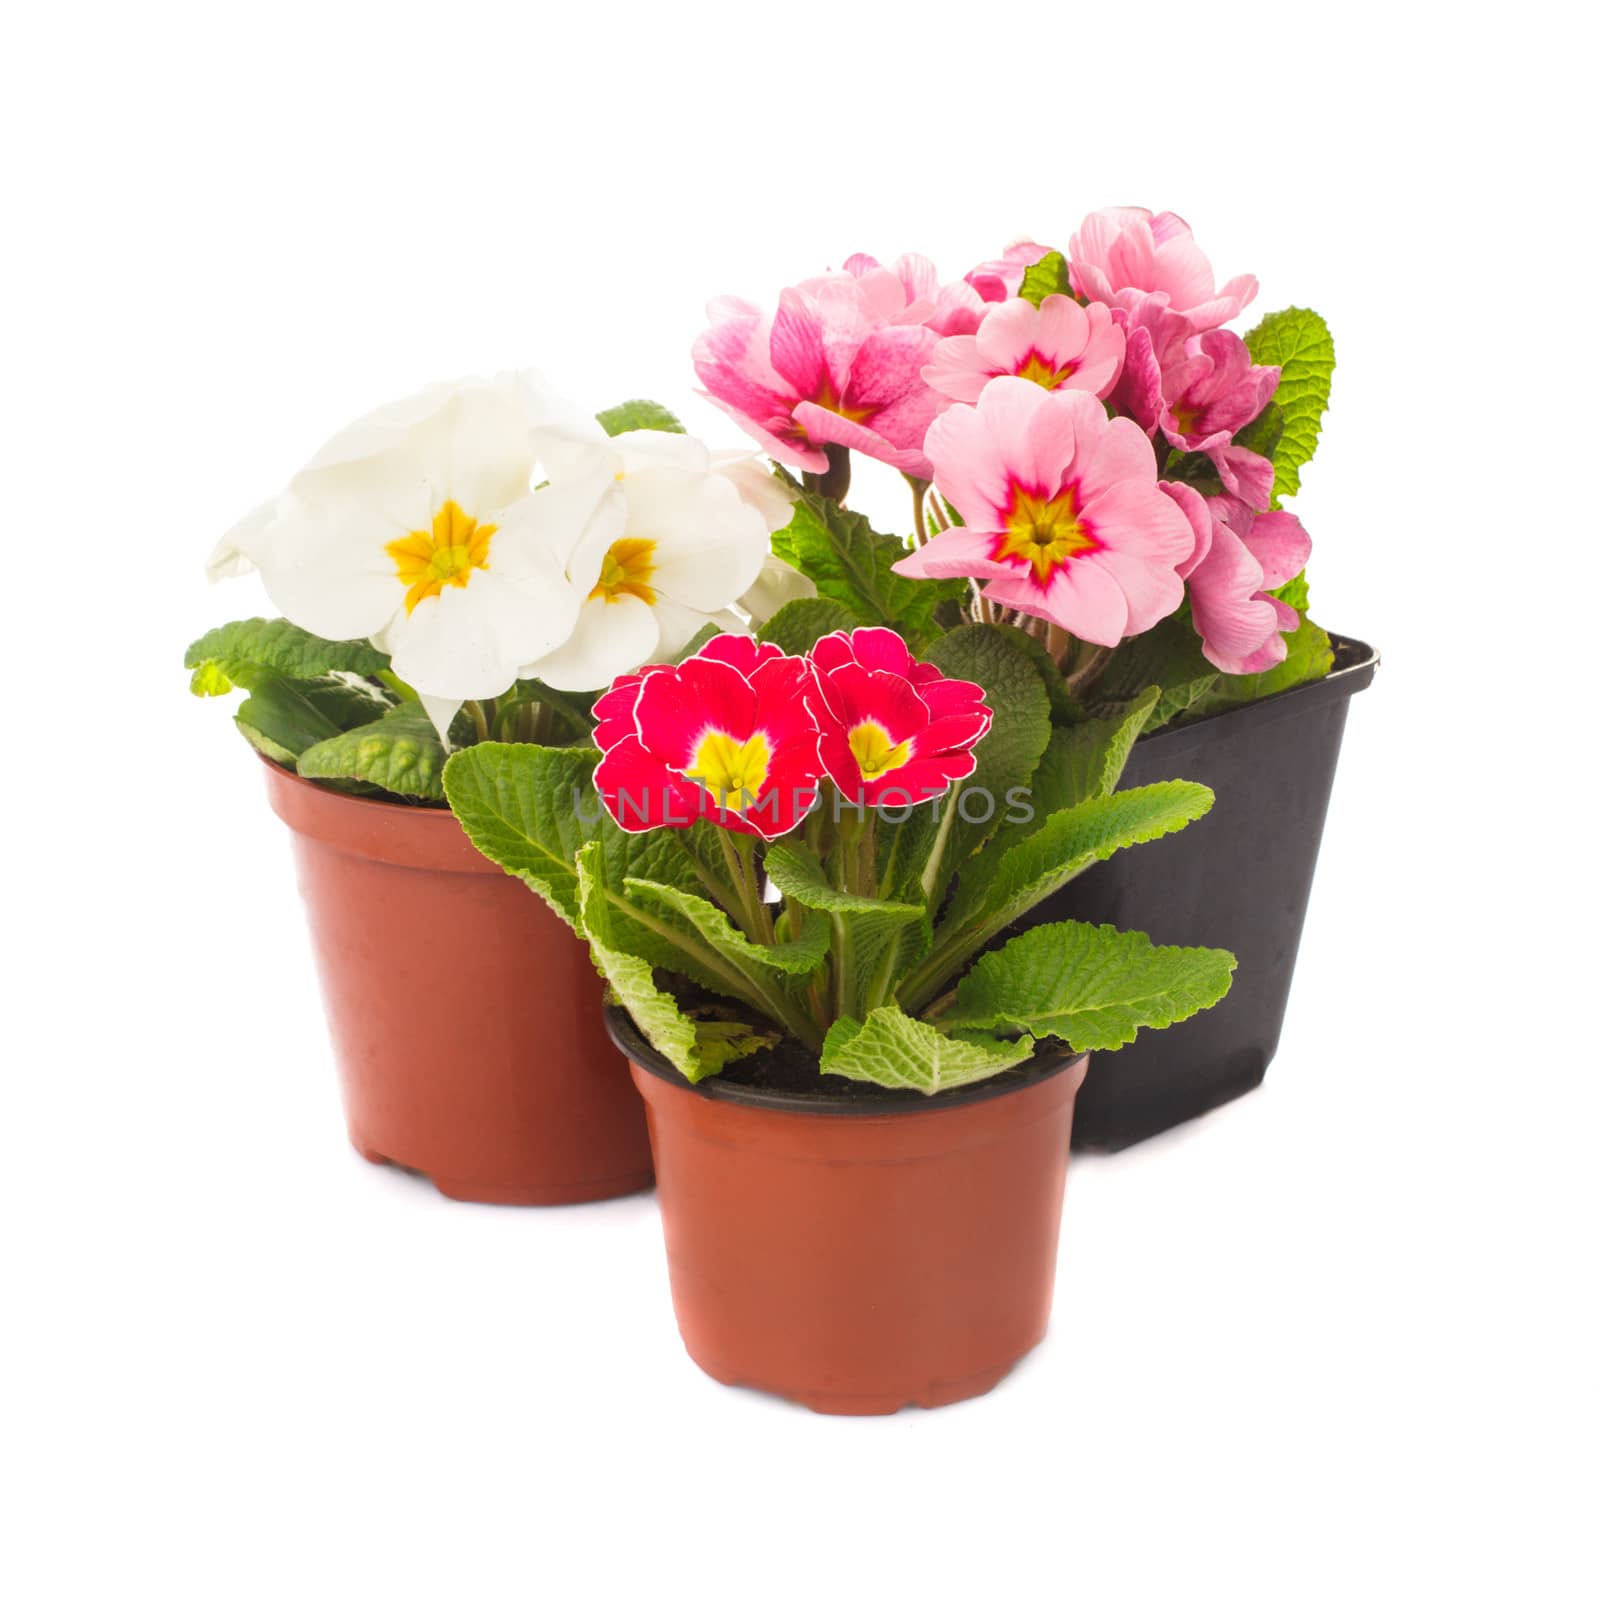 primula flowers in pots isolated on white